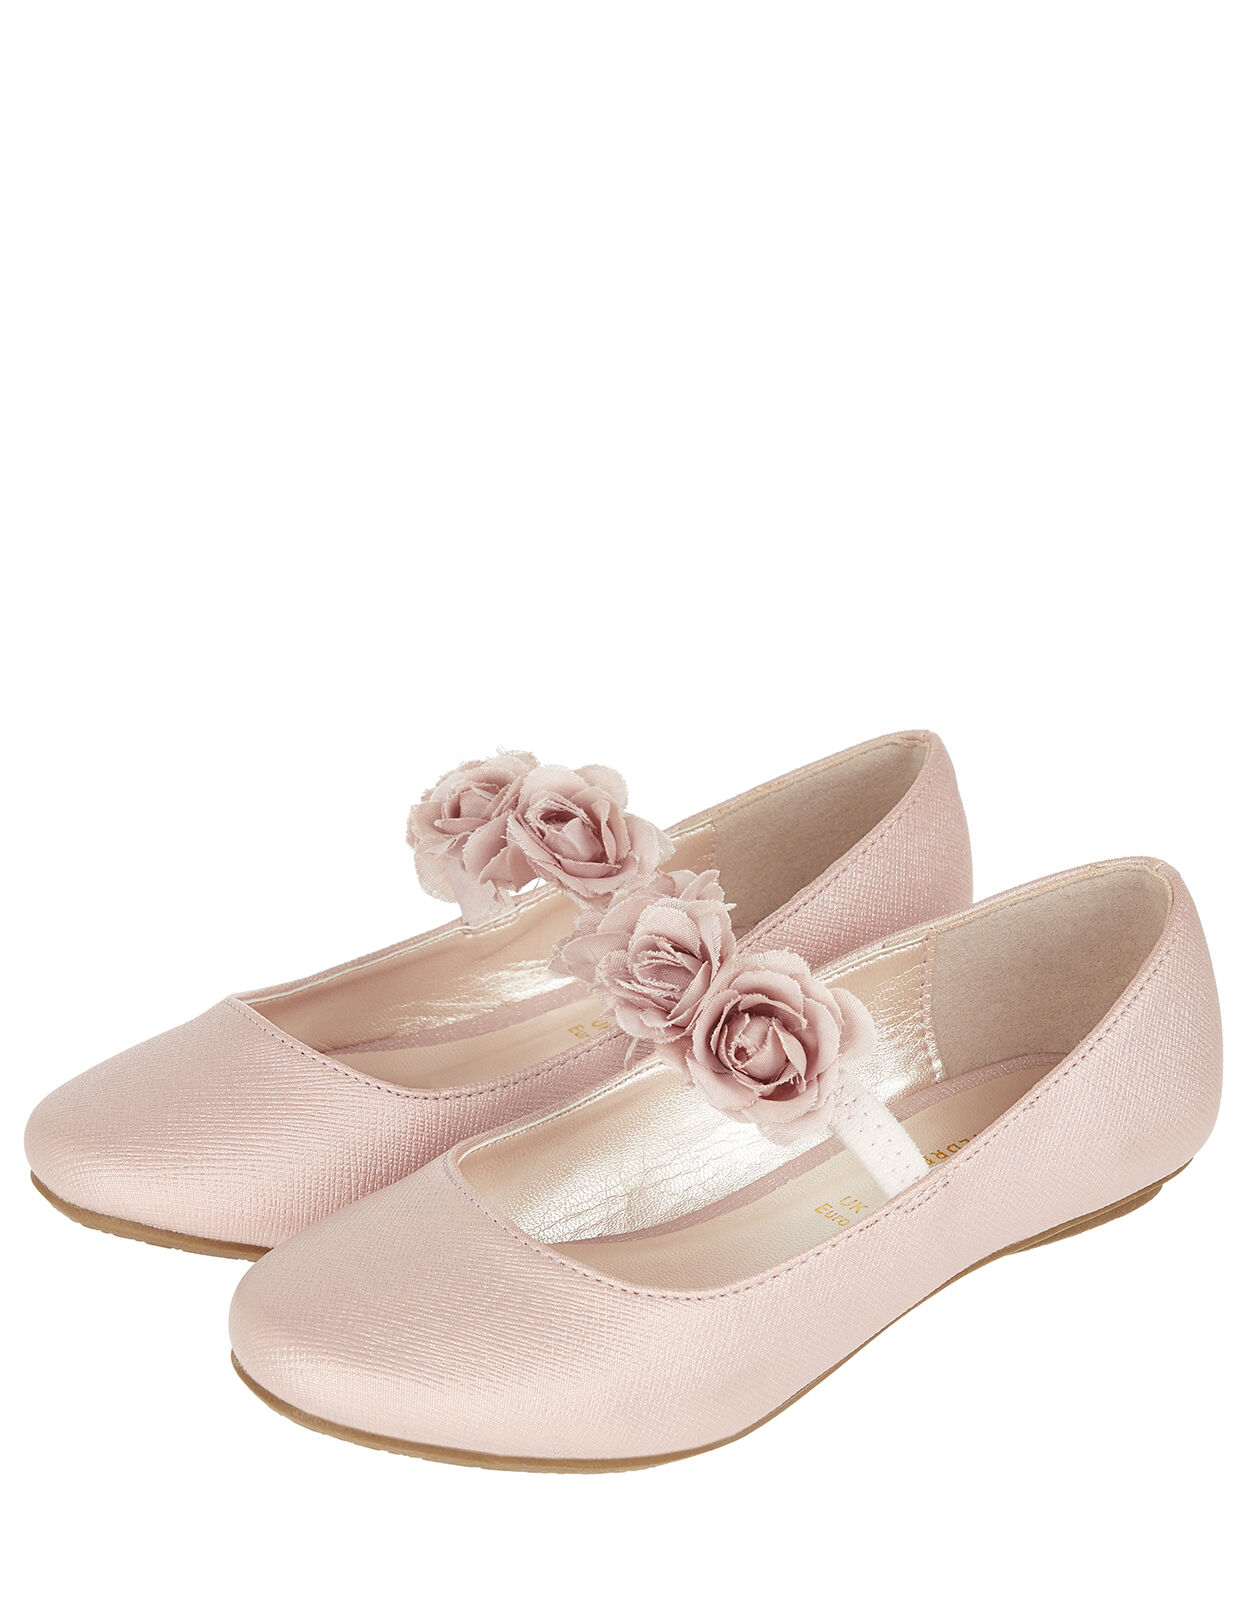 pale pink flat shoes